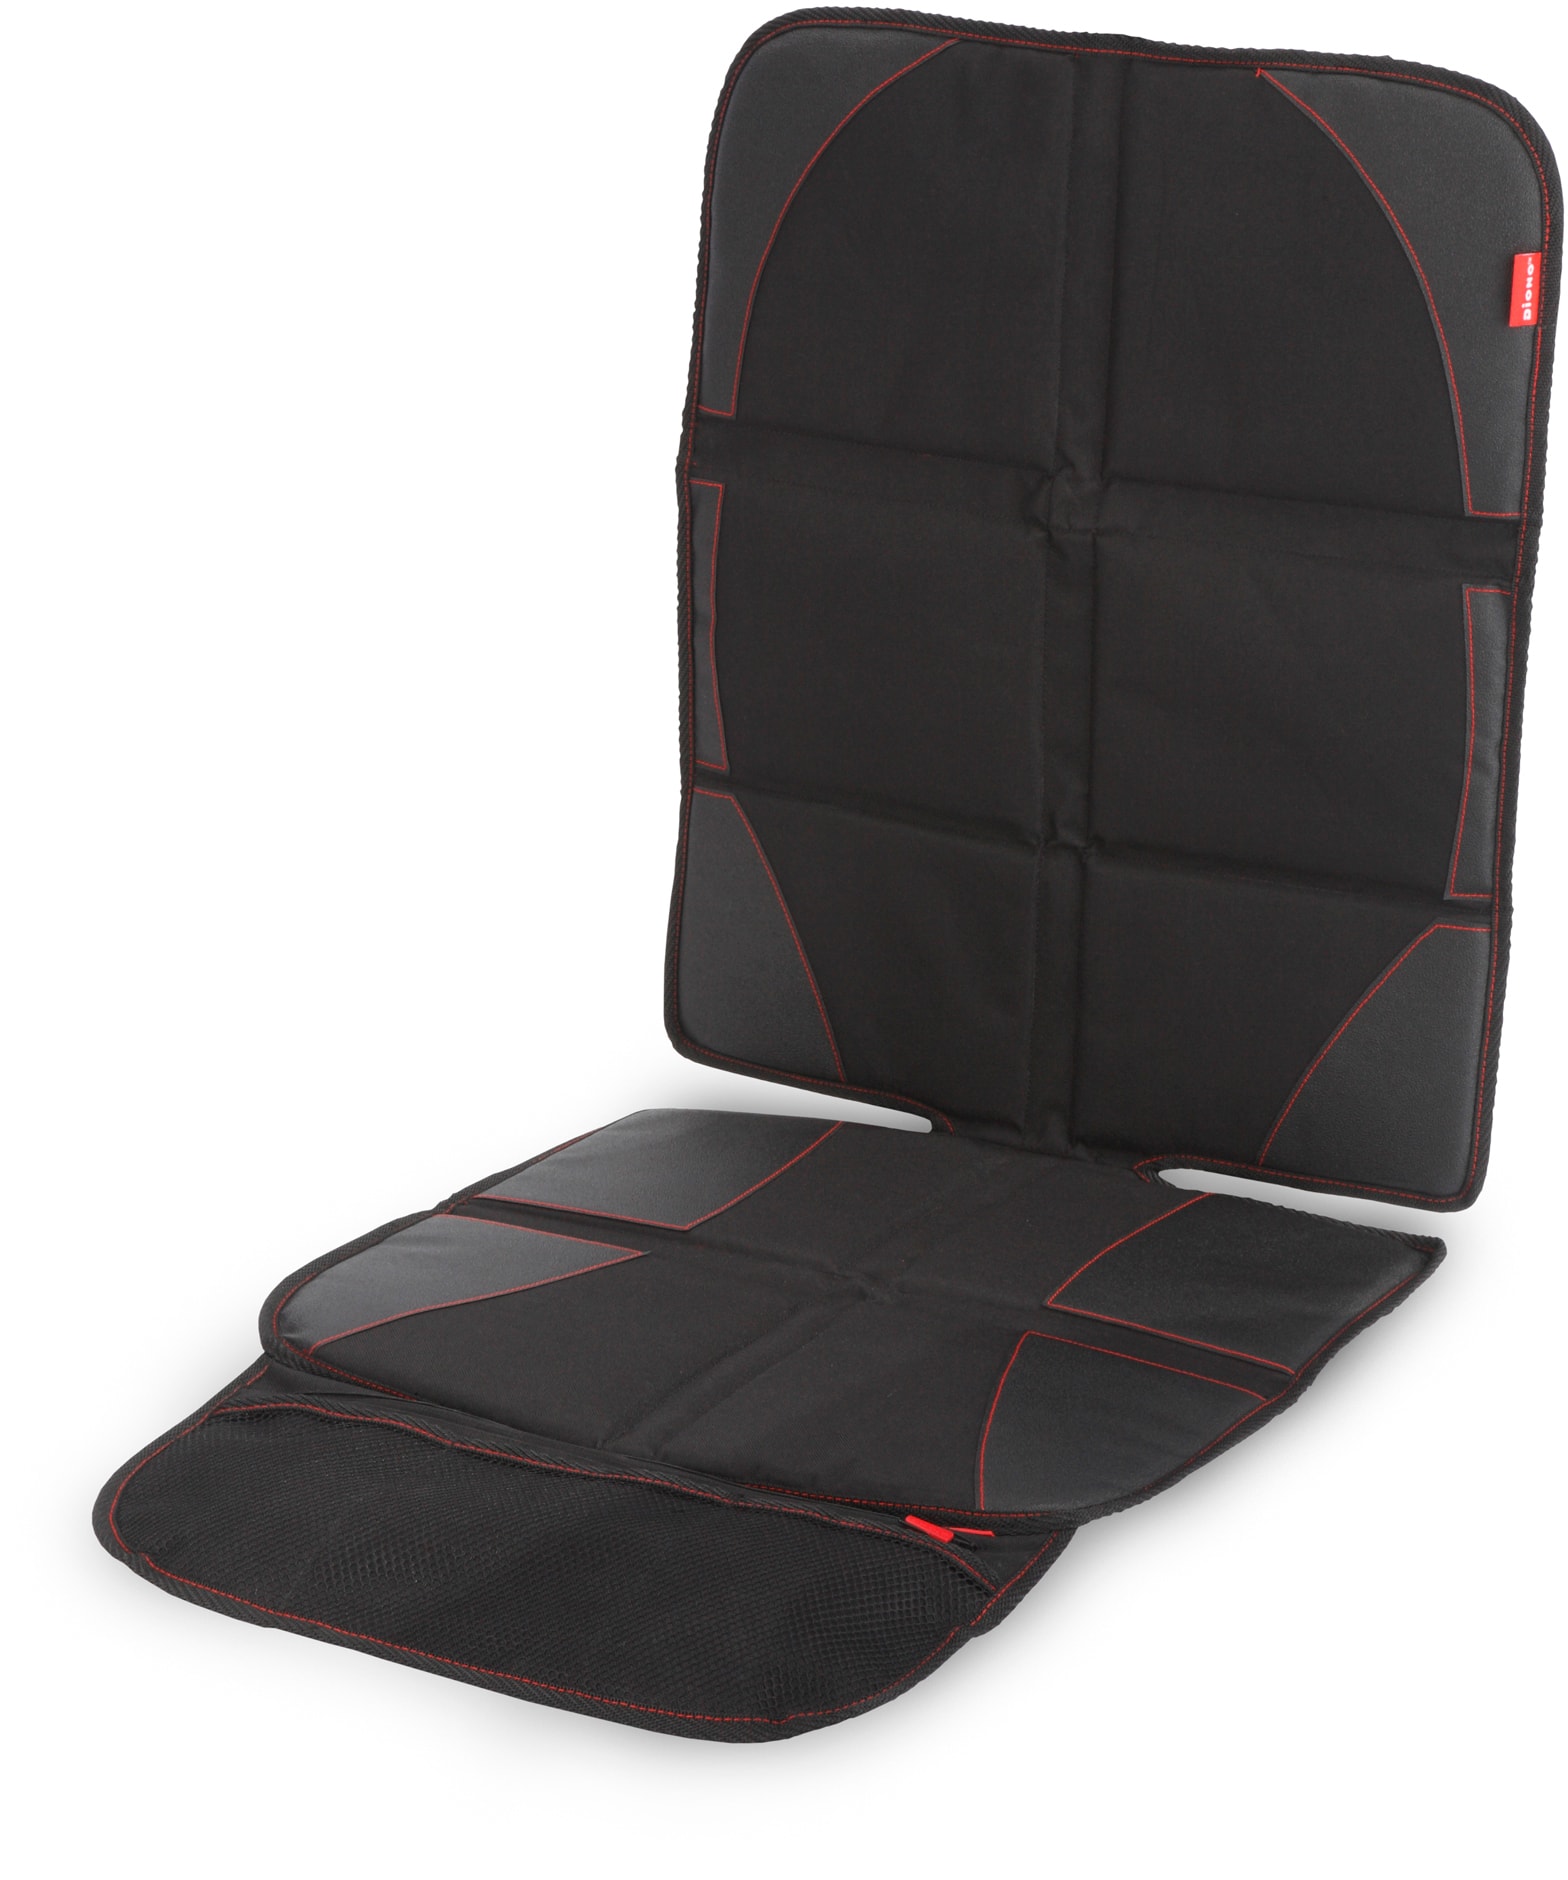 Protection siège auto DIONO Ultra Mat Deluxe- 60370 Pas Cher 